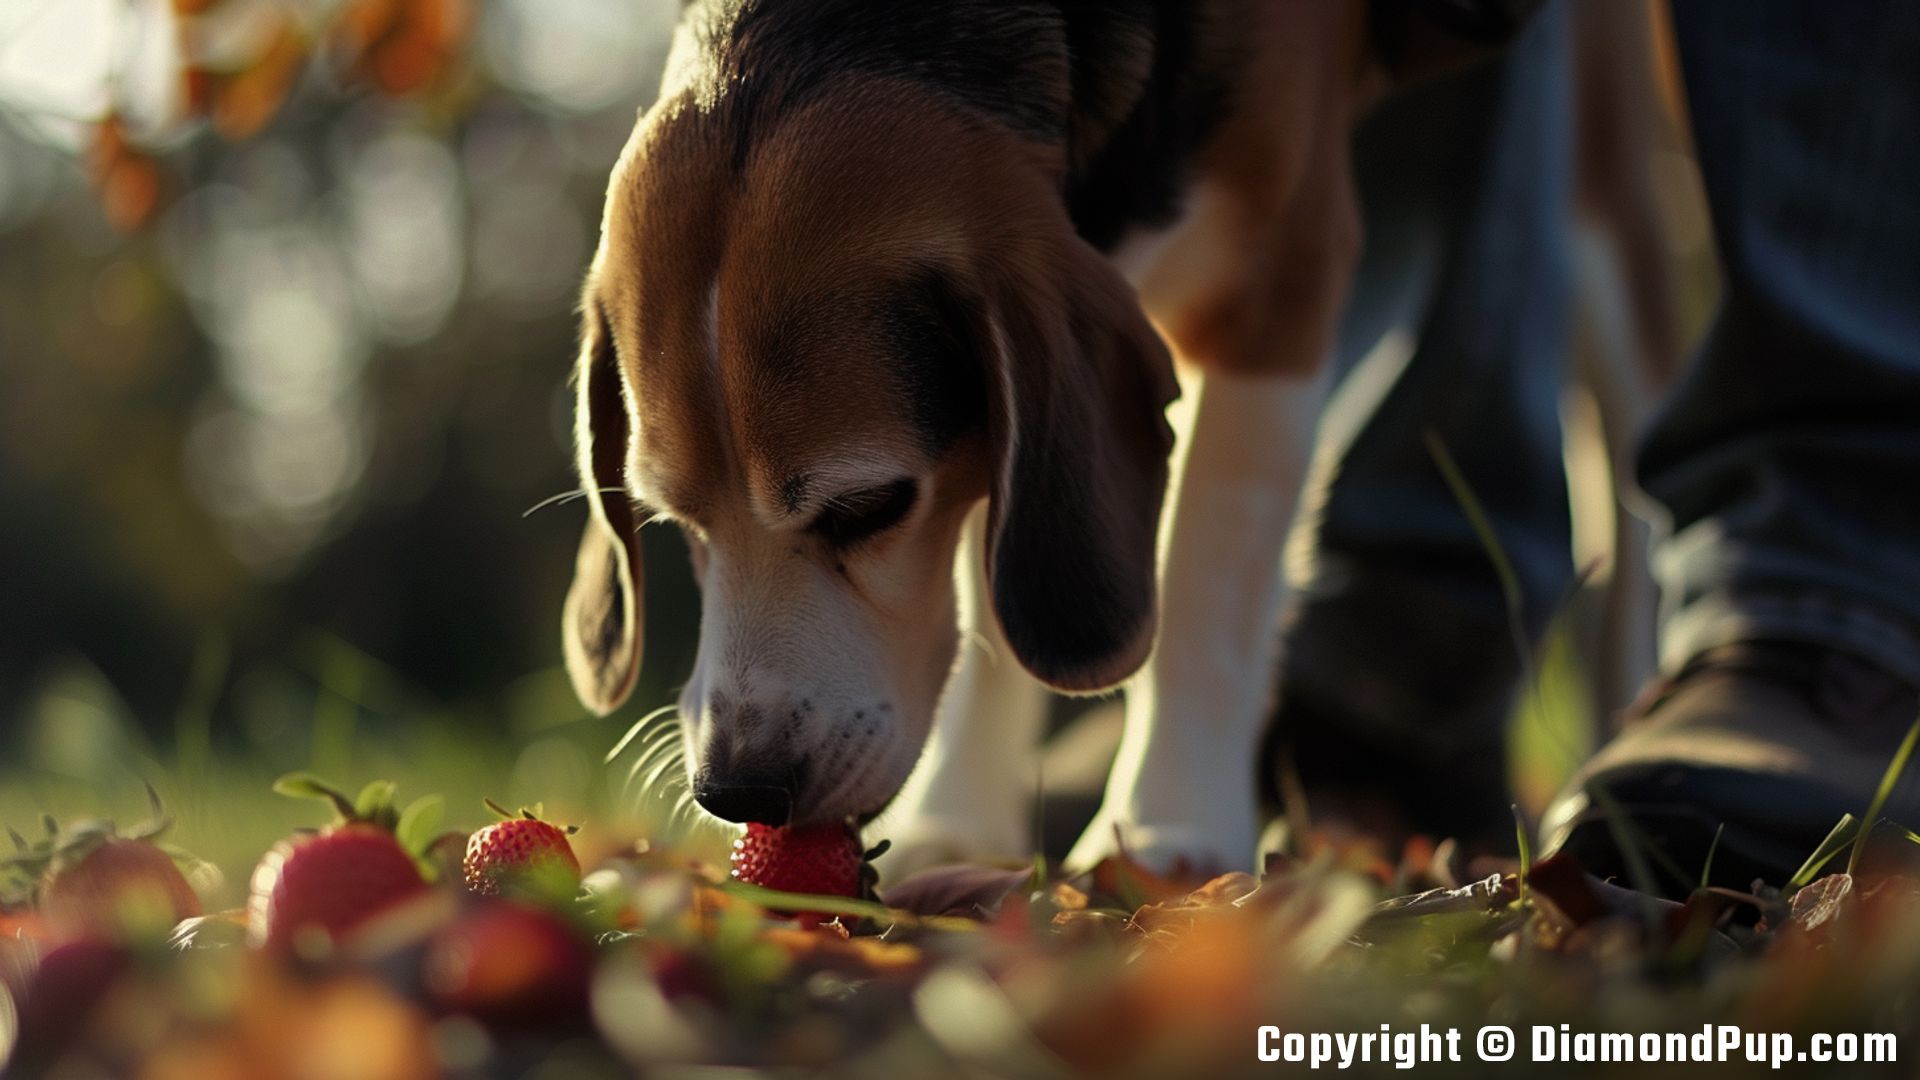 Image of an Adorable Beagle Snacking on Strawberries